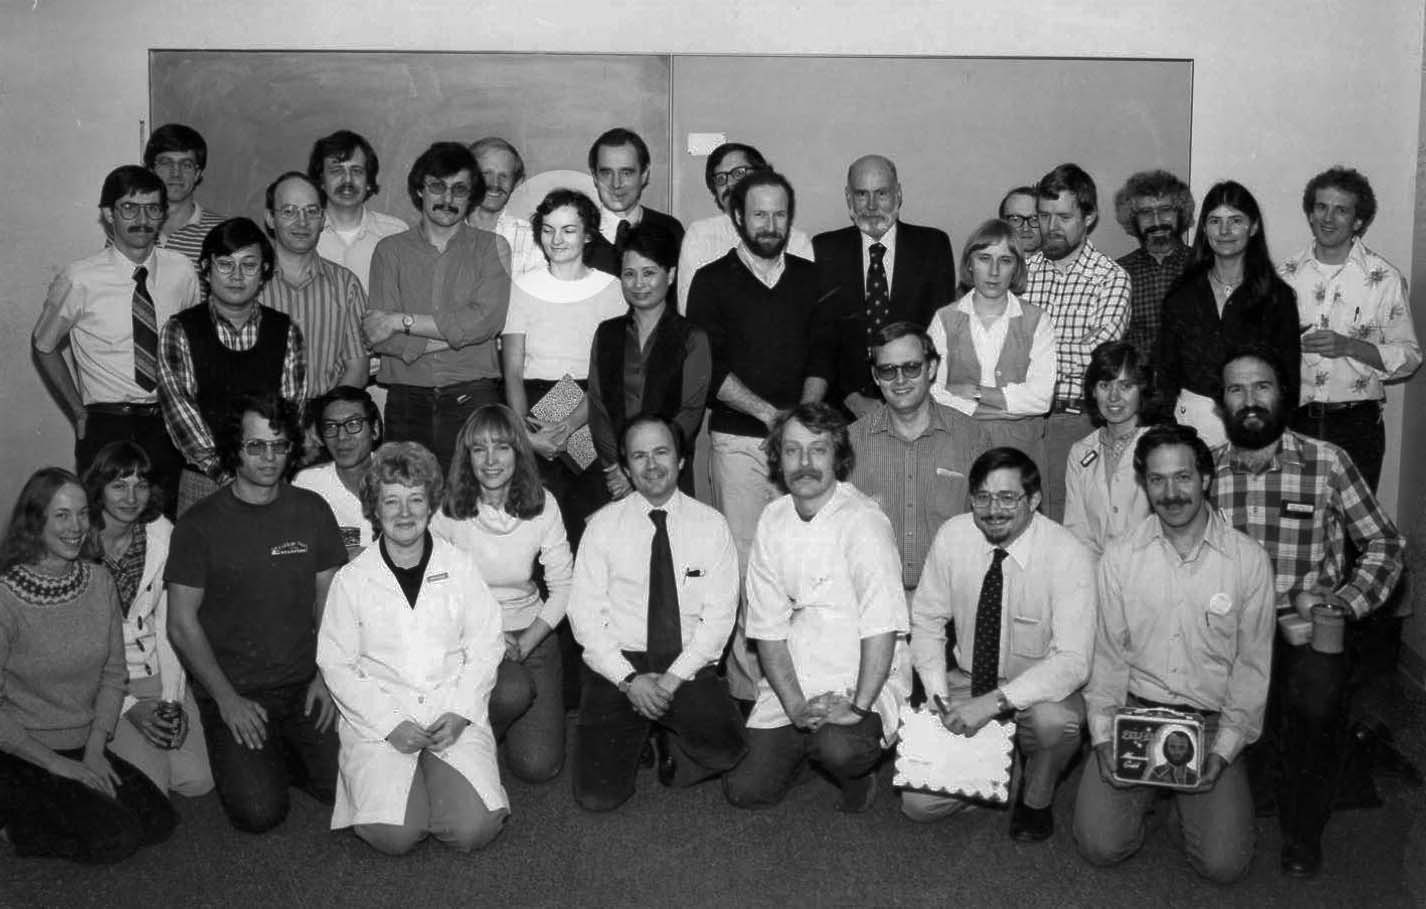 A black and white photo of researchers from 1980